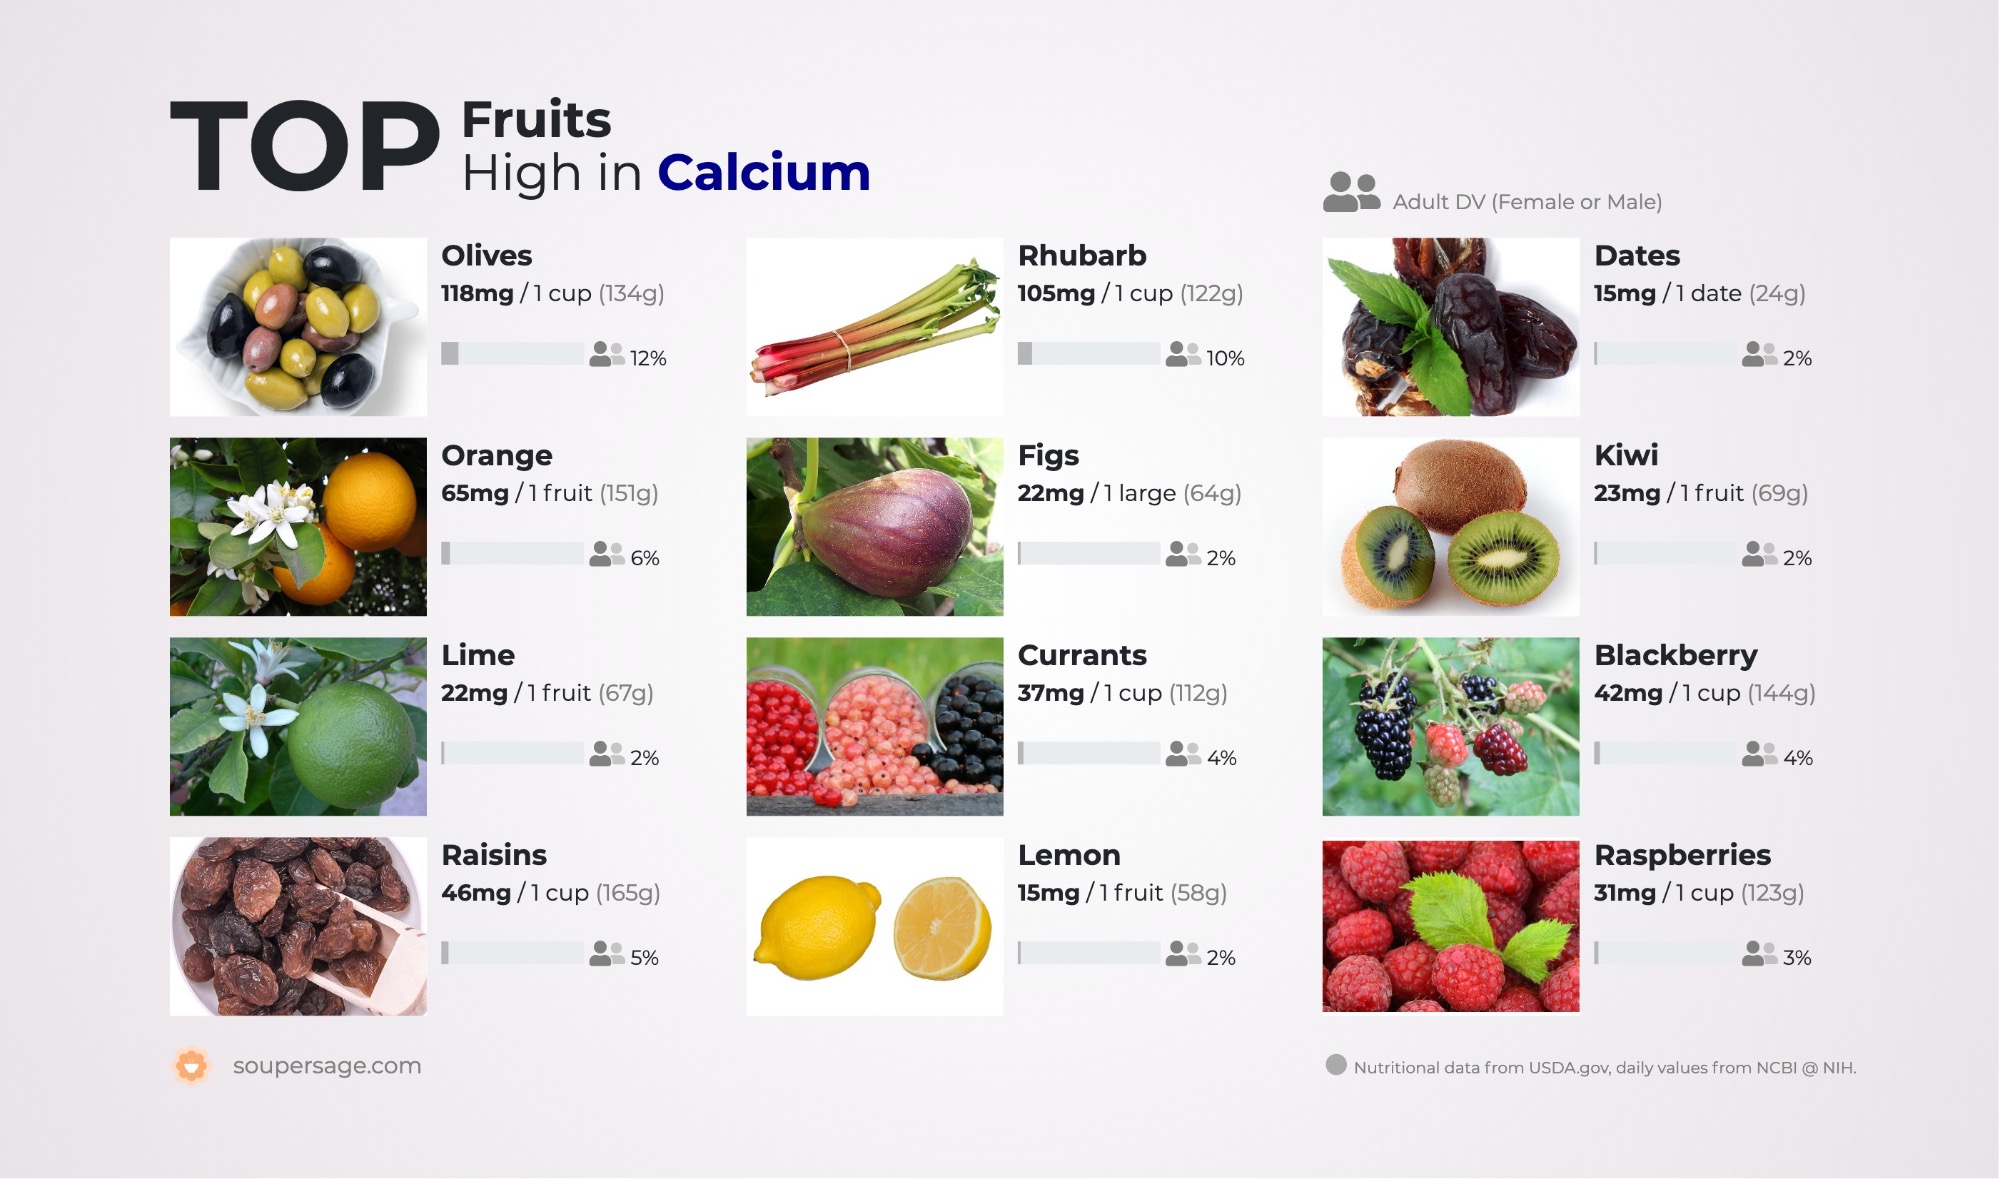 image of Top Fruits High in Calcium